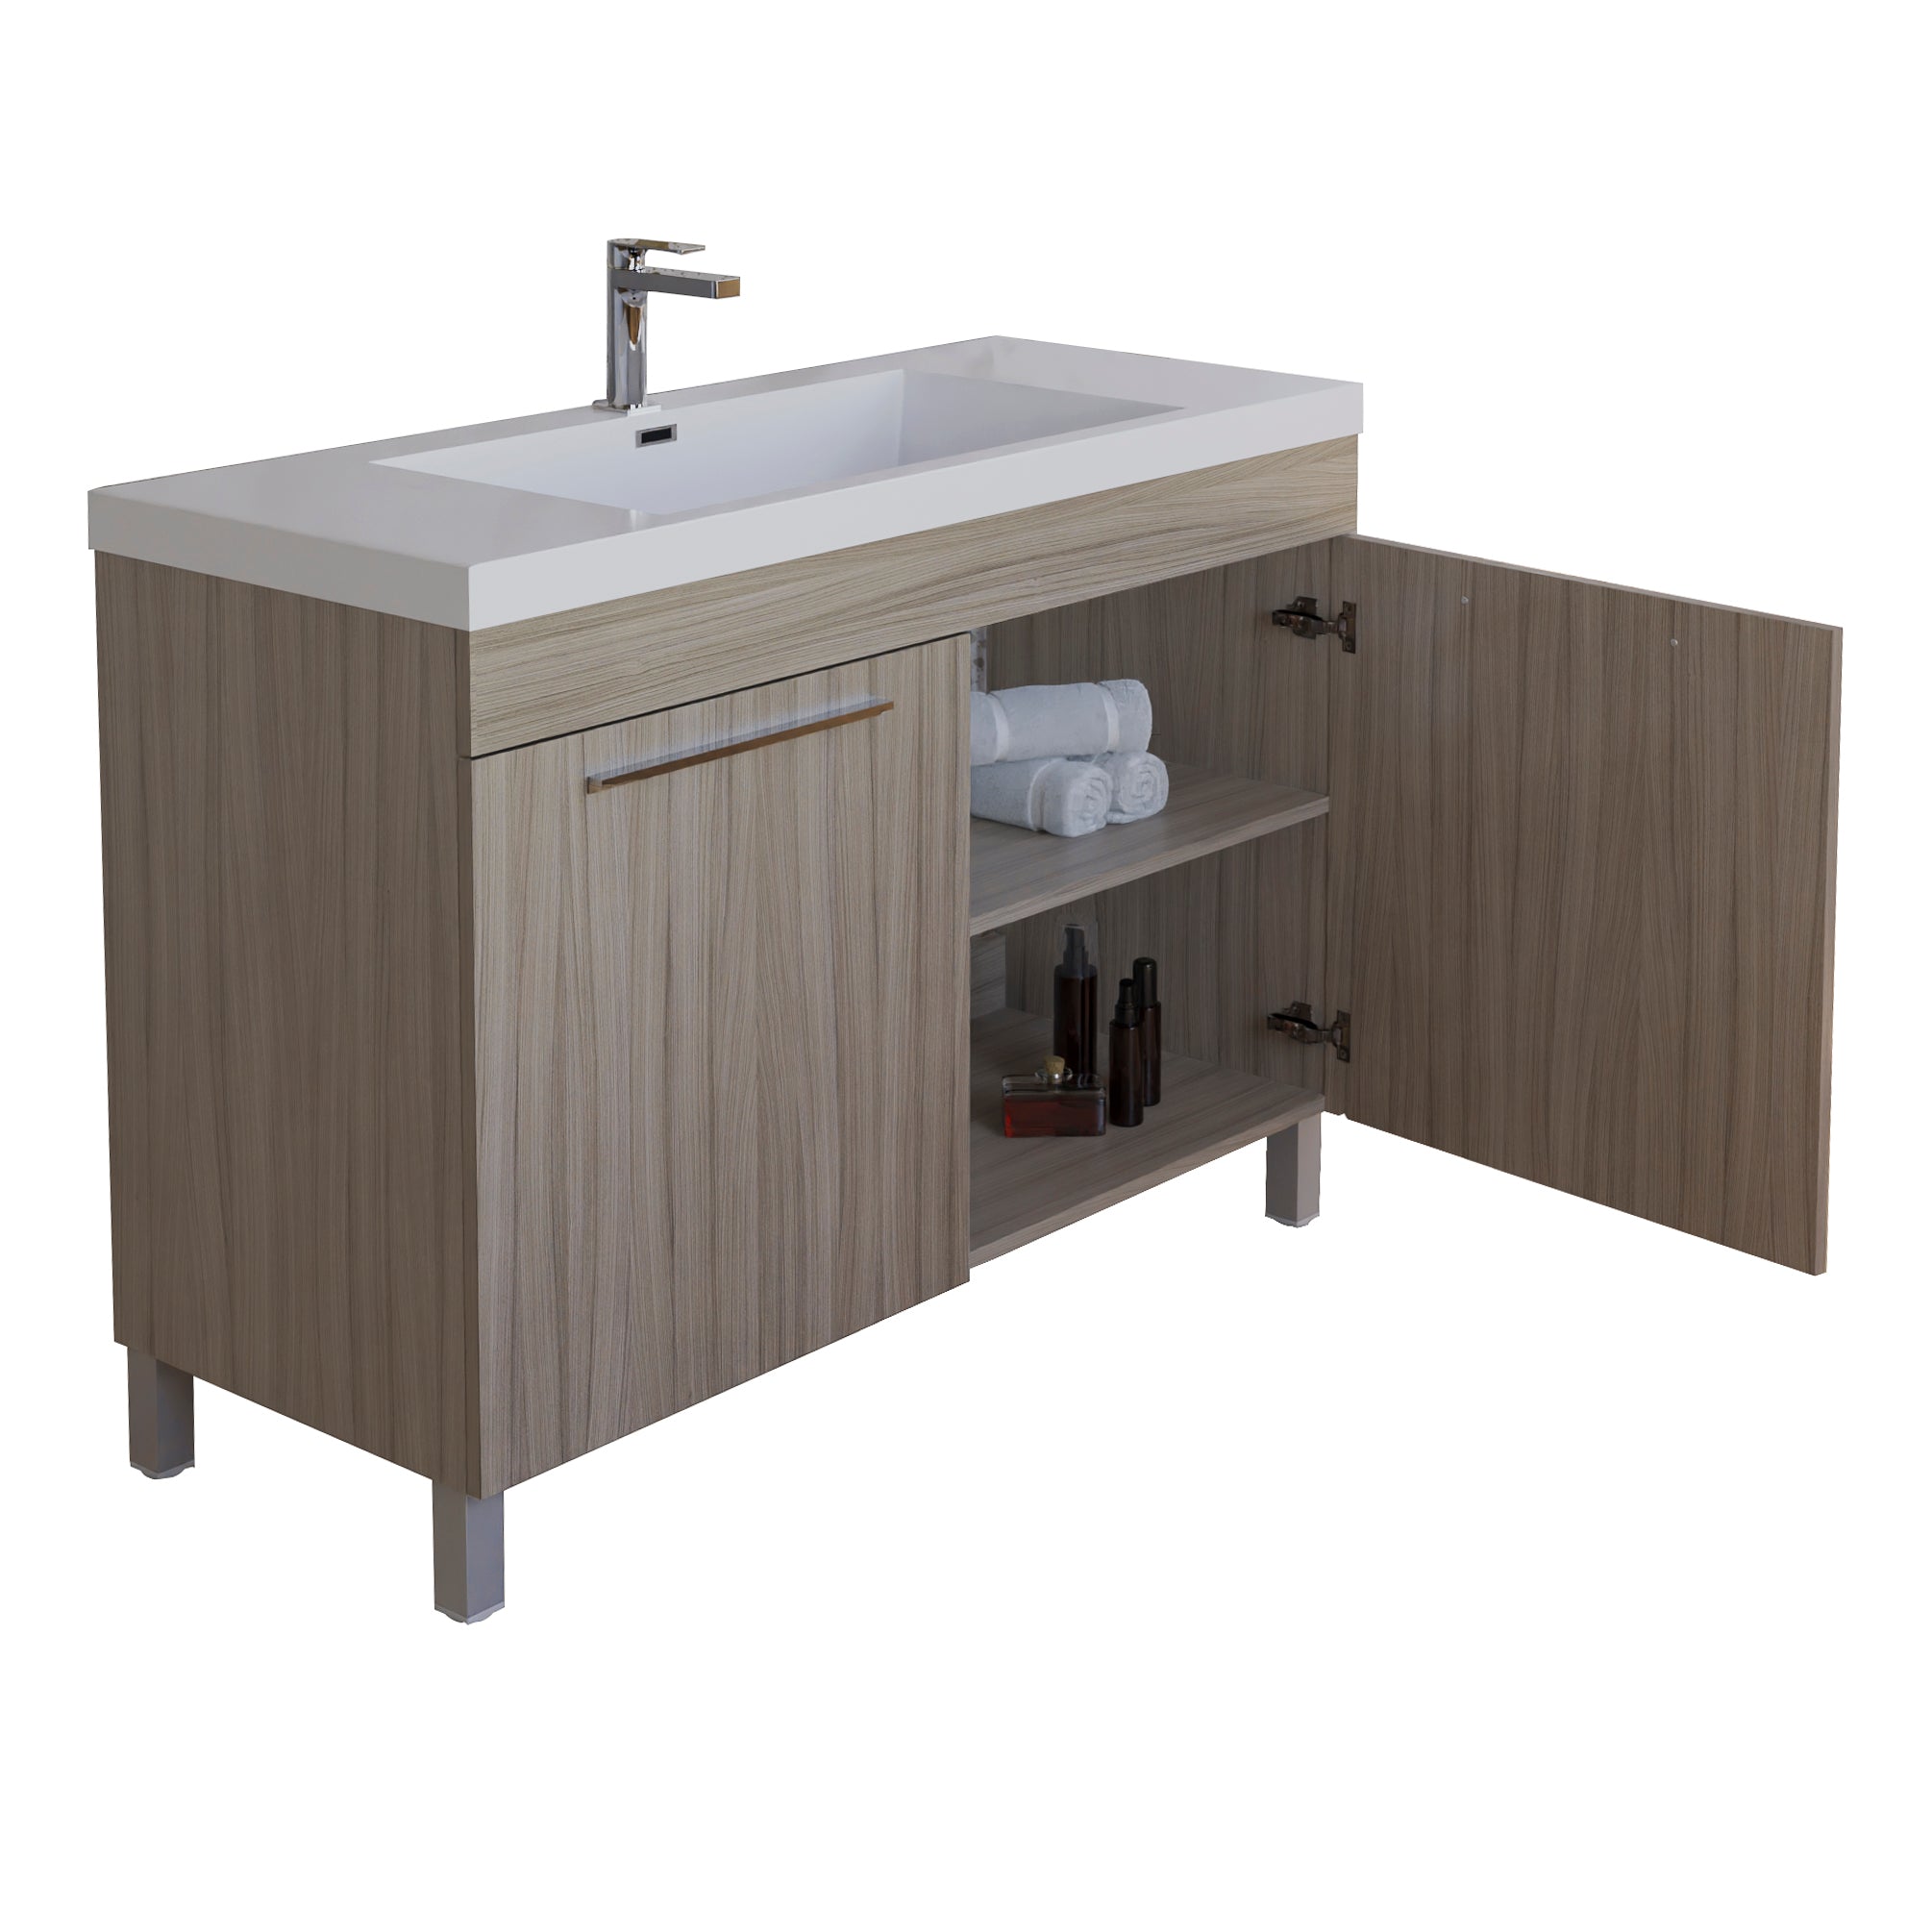 Ocean 35.5 Nilo Grey Wood Texture Cabinet, Square Cultured Marble Sink, Free Standing Vanity Set